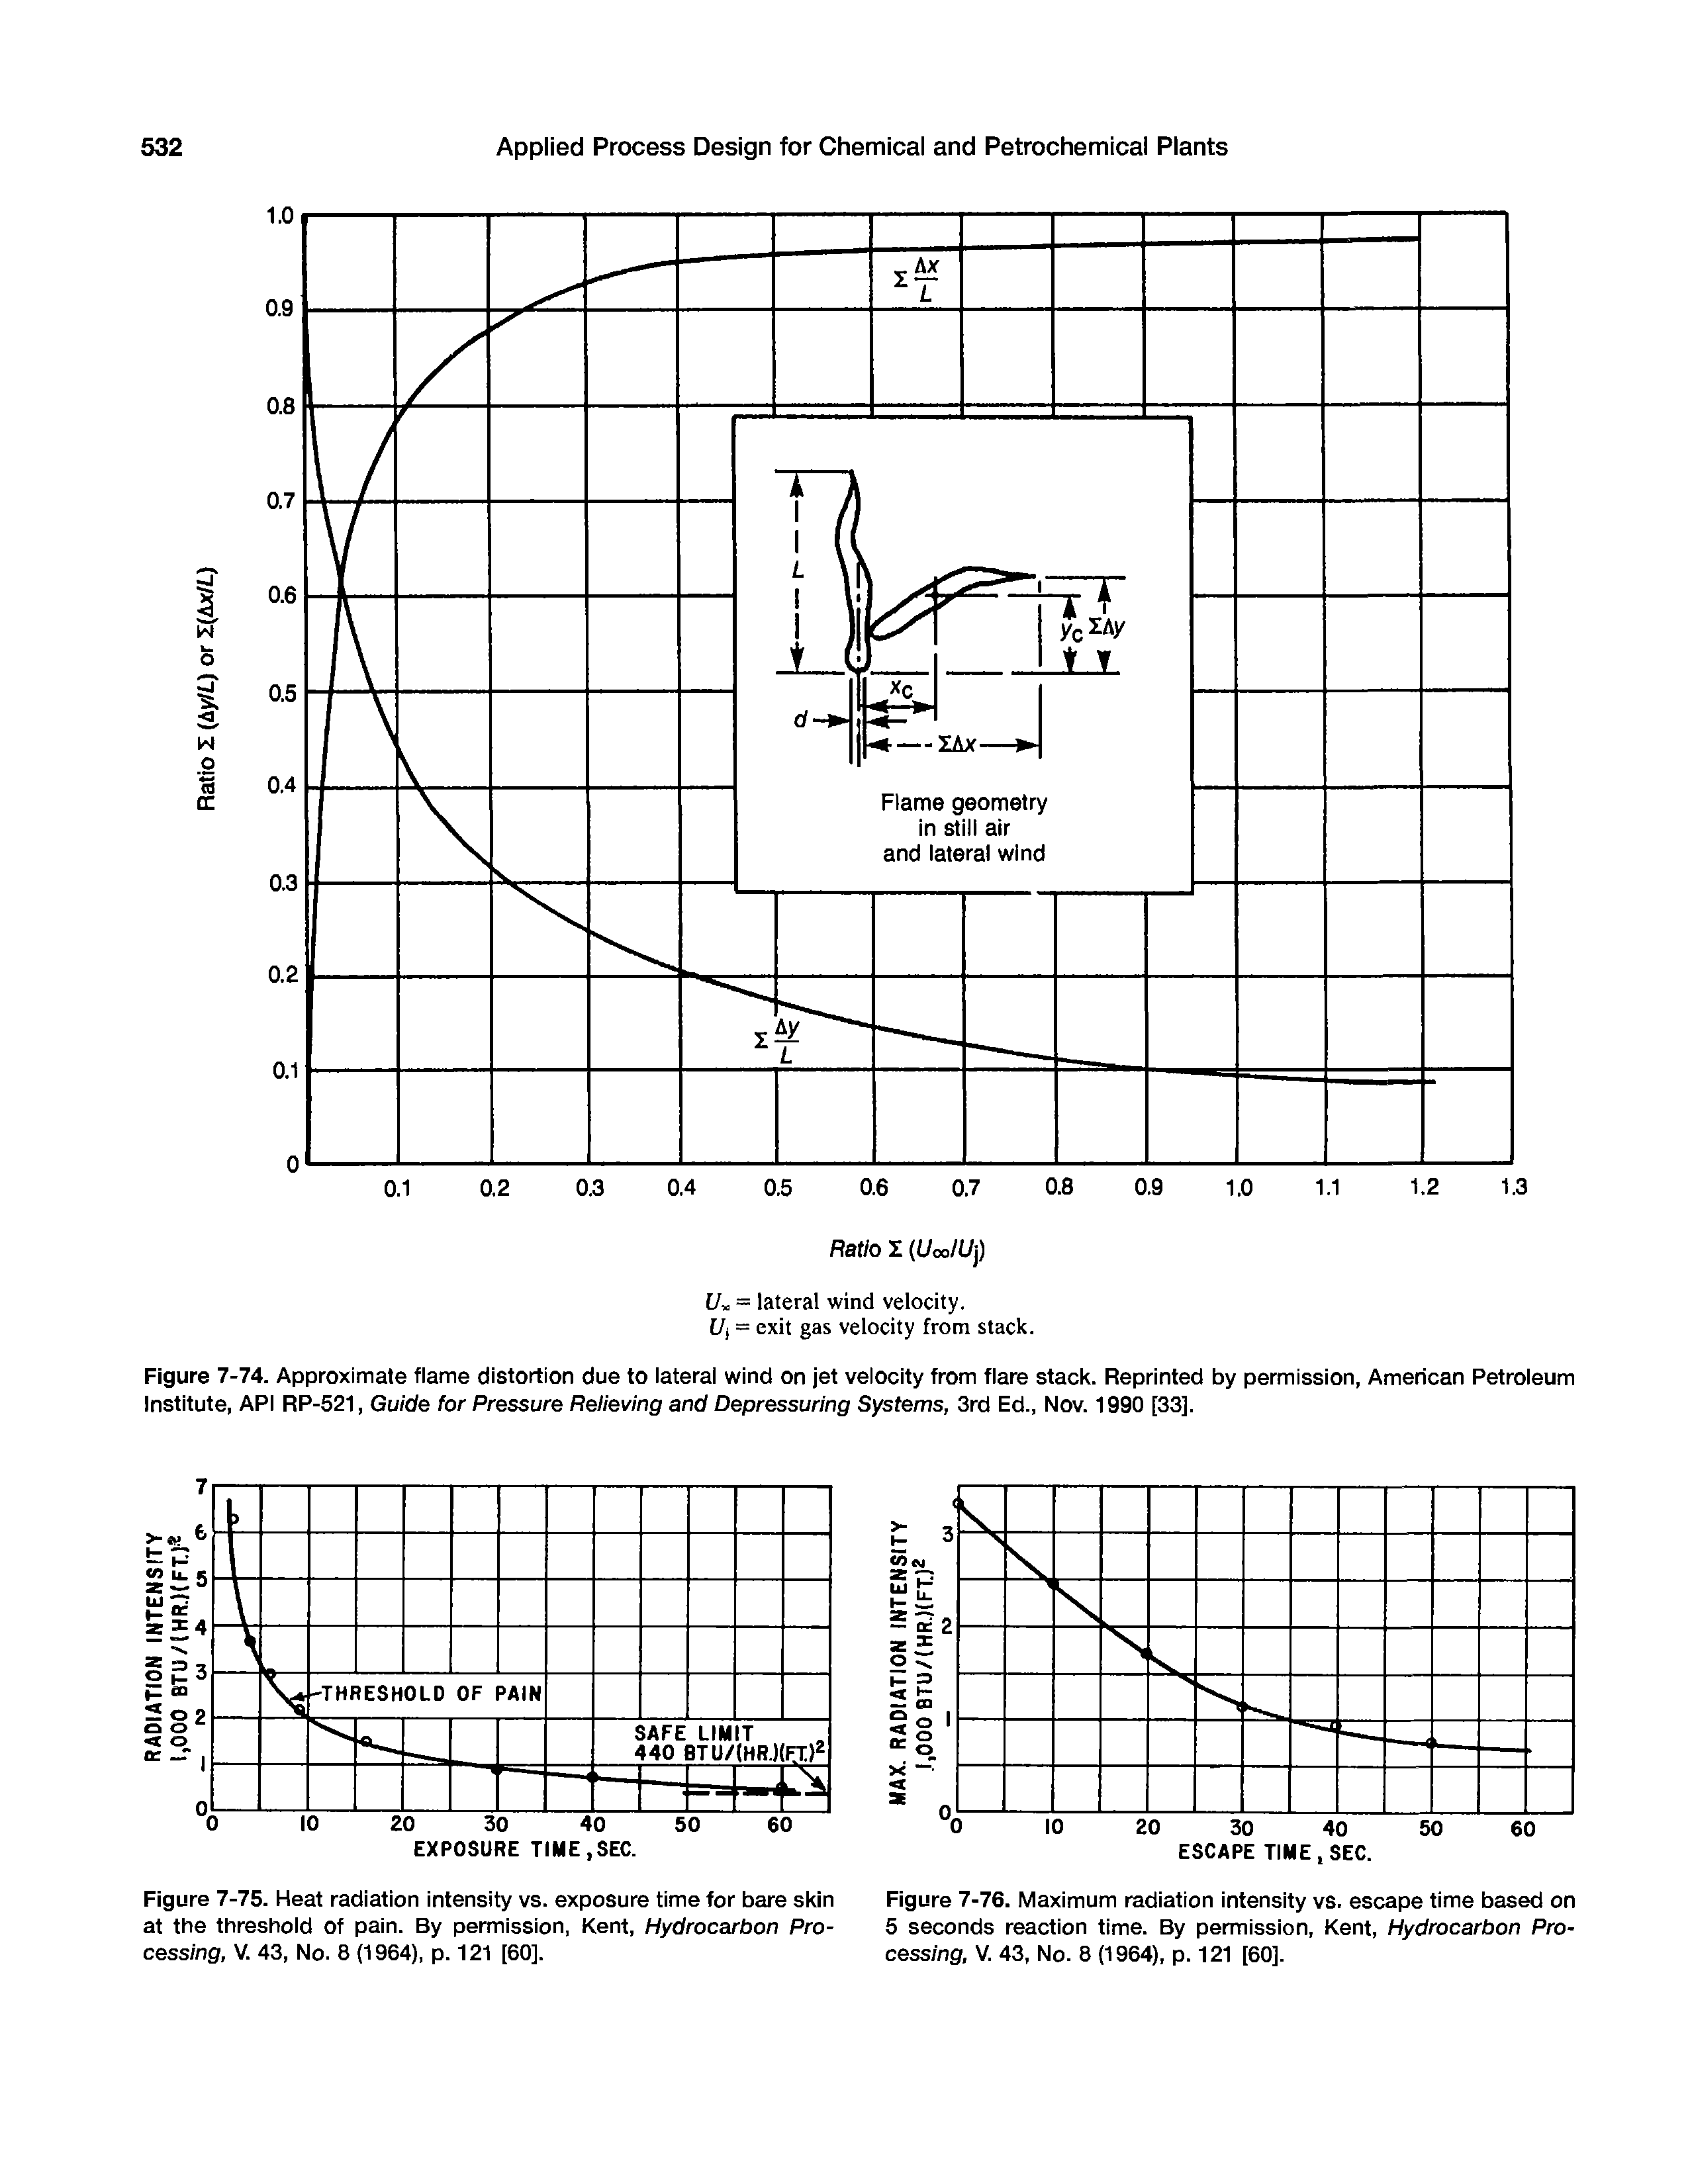 Figure 7-74. Approximate flame distortion due to lateral wind on jet velocity from flare stack. Reprinted by permission, American Petroleum Institute, API RP-521, Guide for Pressure Reiieving and Depressuring Systems, 3rd Ed., Nov. 1990 [33].